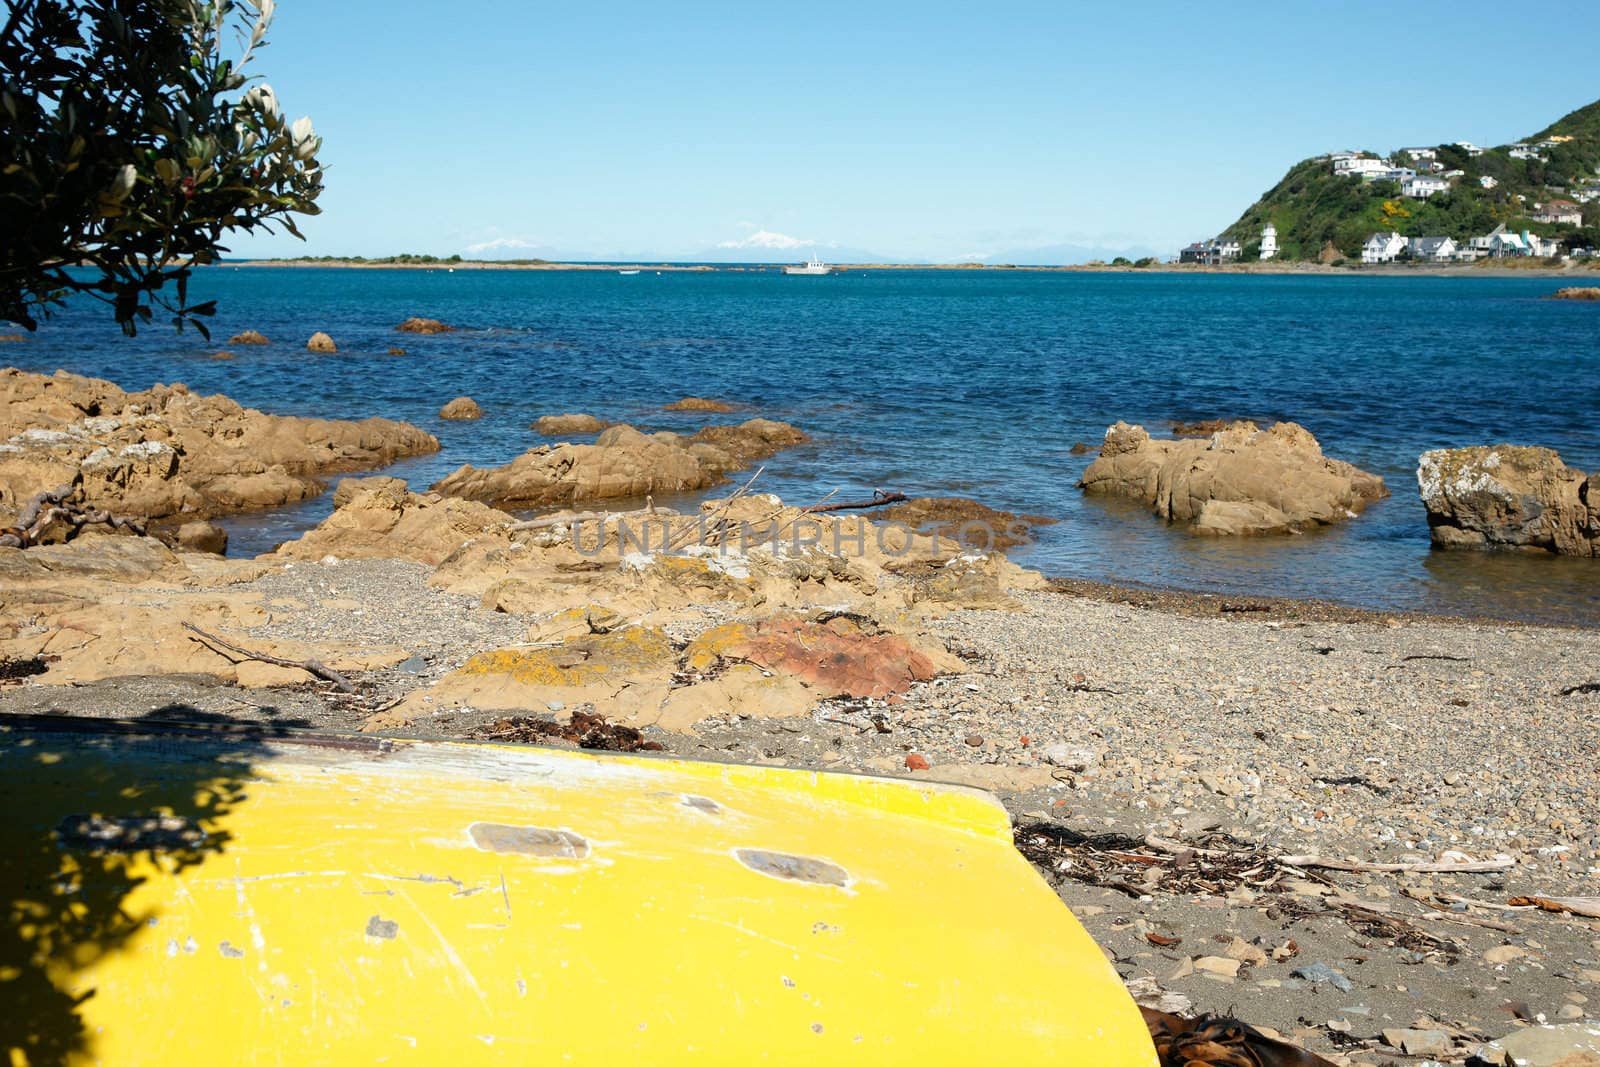 Yellow upturned dingy on beach at Isalnad Bay New Zealand. by brians101